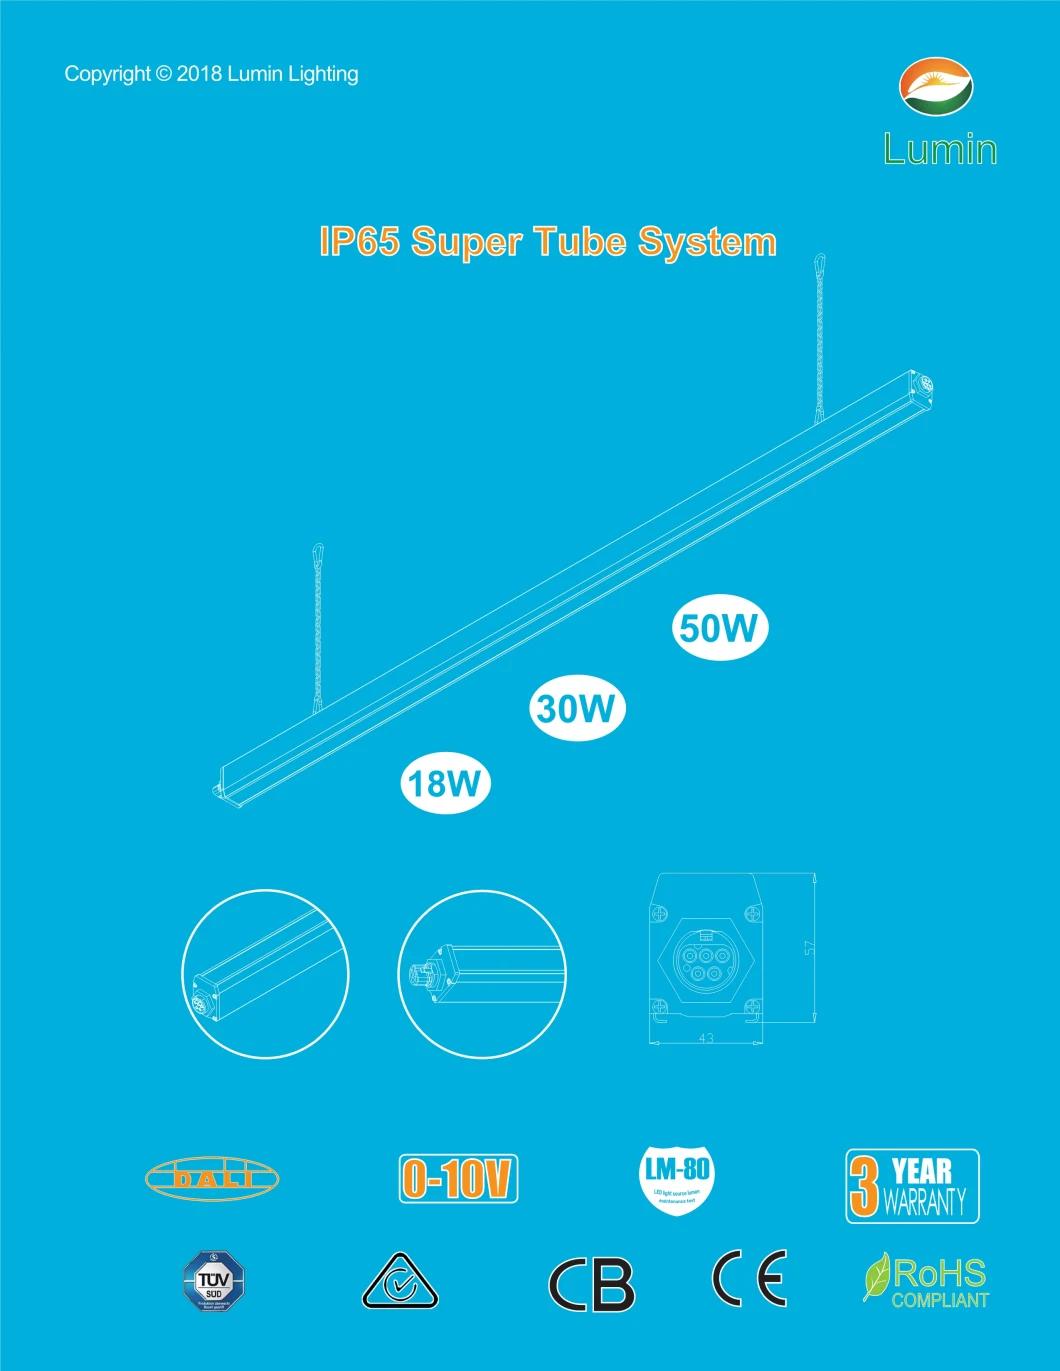 18W 1.2 M Super Tube System LED Linear Light with Ce & RoHS Approvals